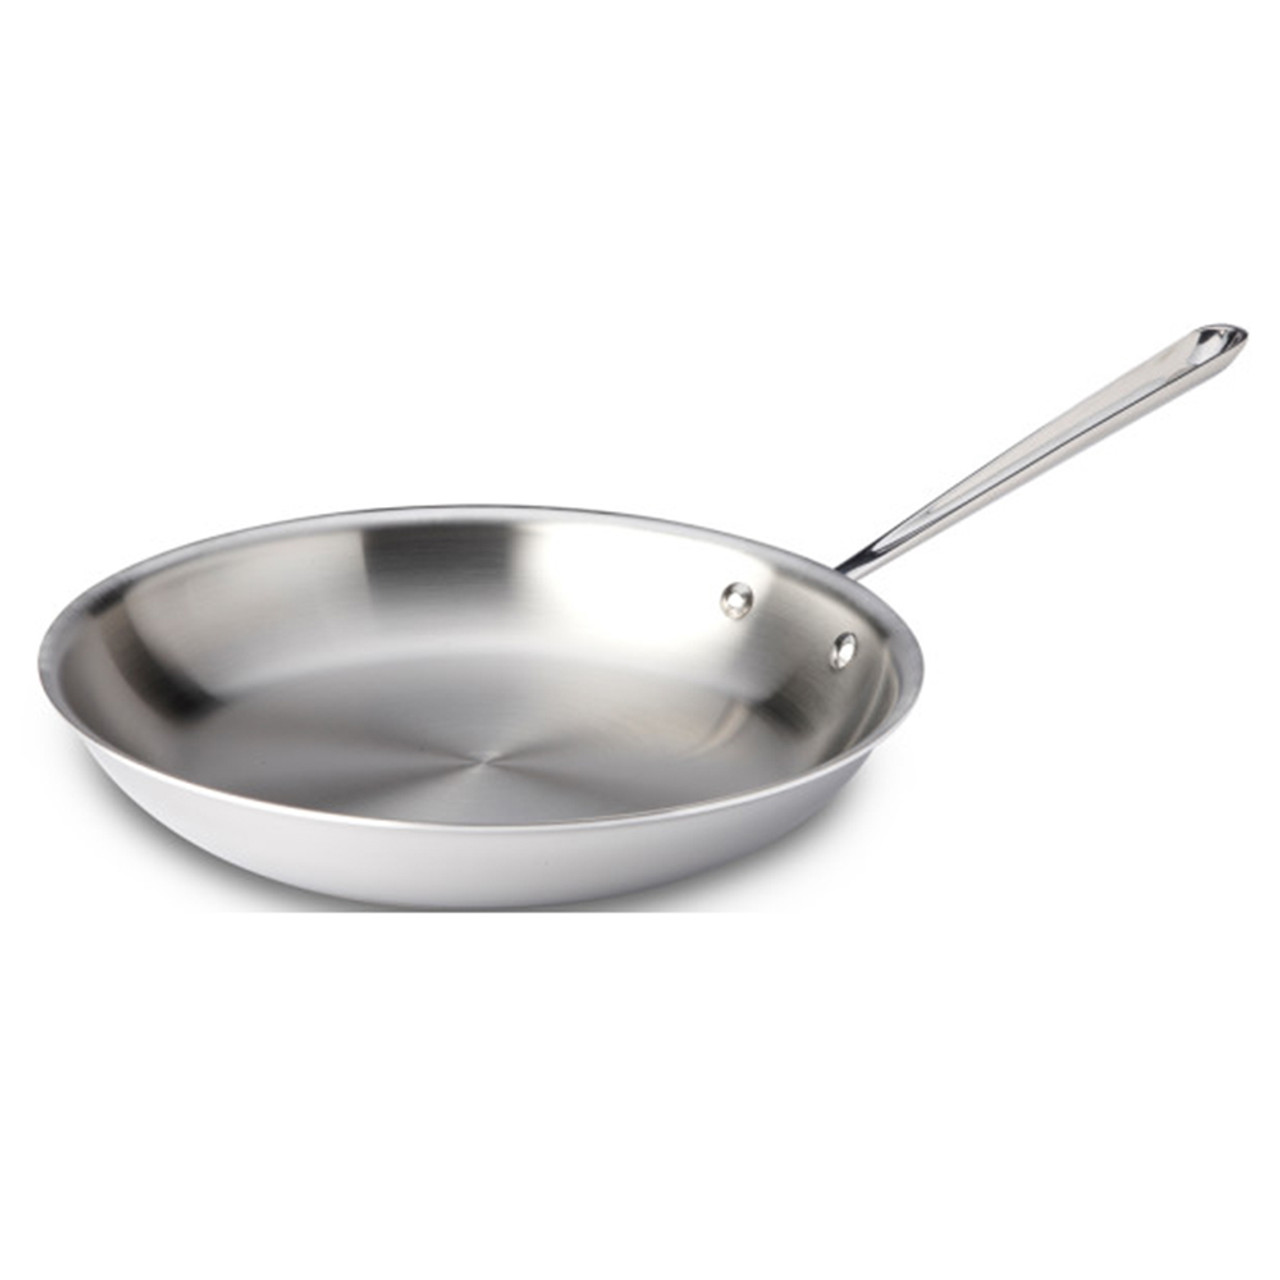 https://cdn11.bigcommerce.com/s-hccytny0od/images/stencil/1280x1280/products/486/1808/all-clad-stainless-steel-fry-pan-12-inch__64390.1510956806.jpg?c=2?imbypass=on